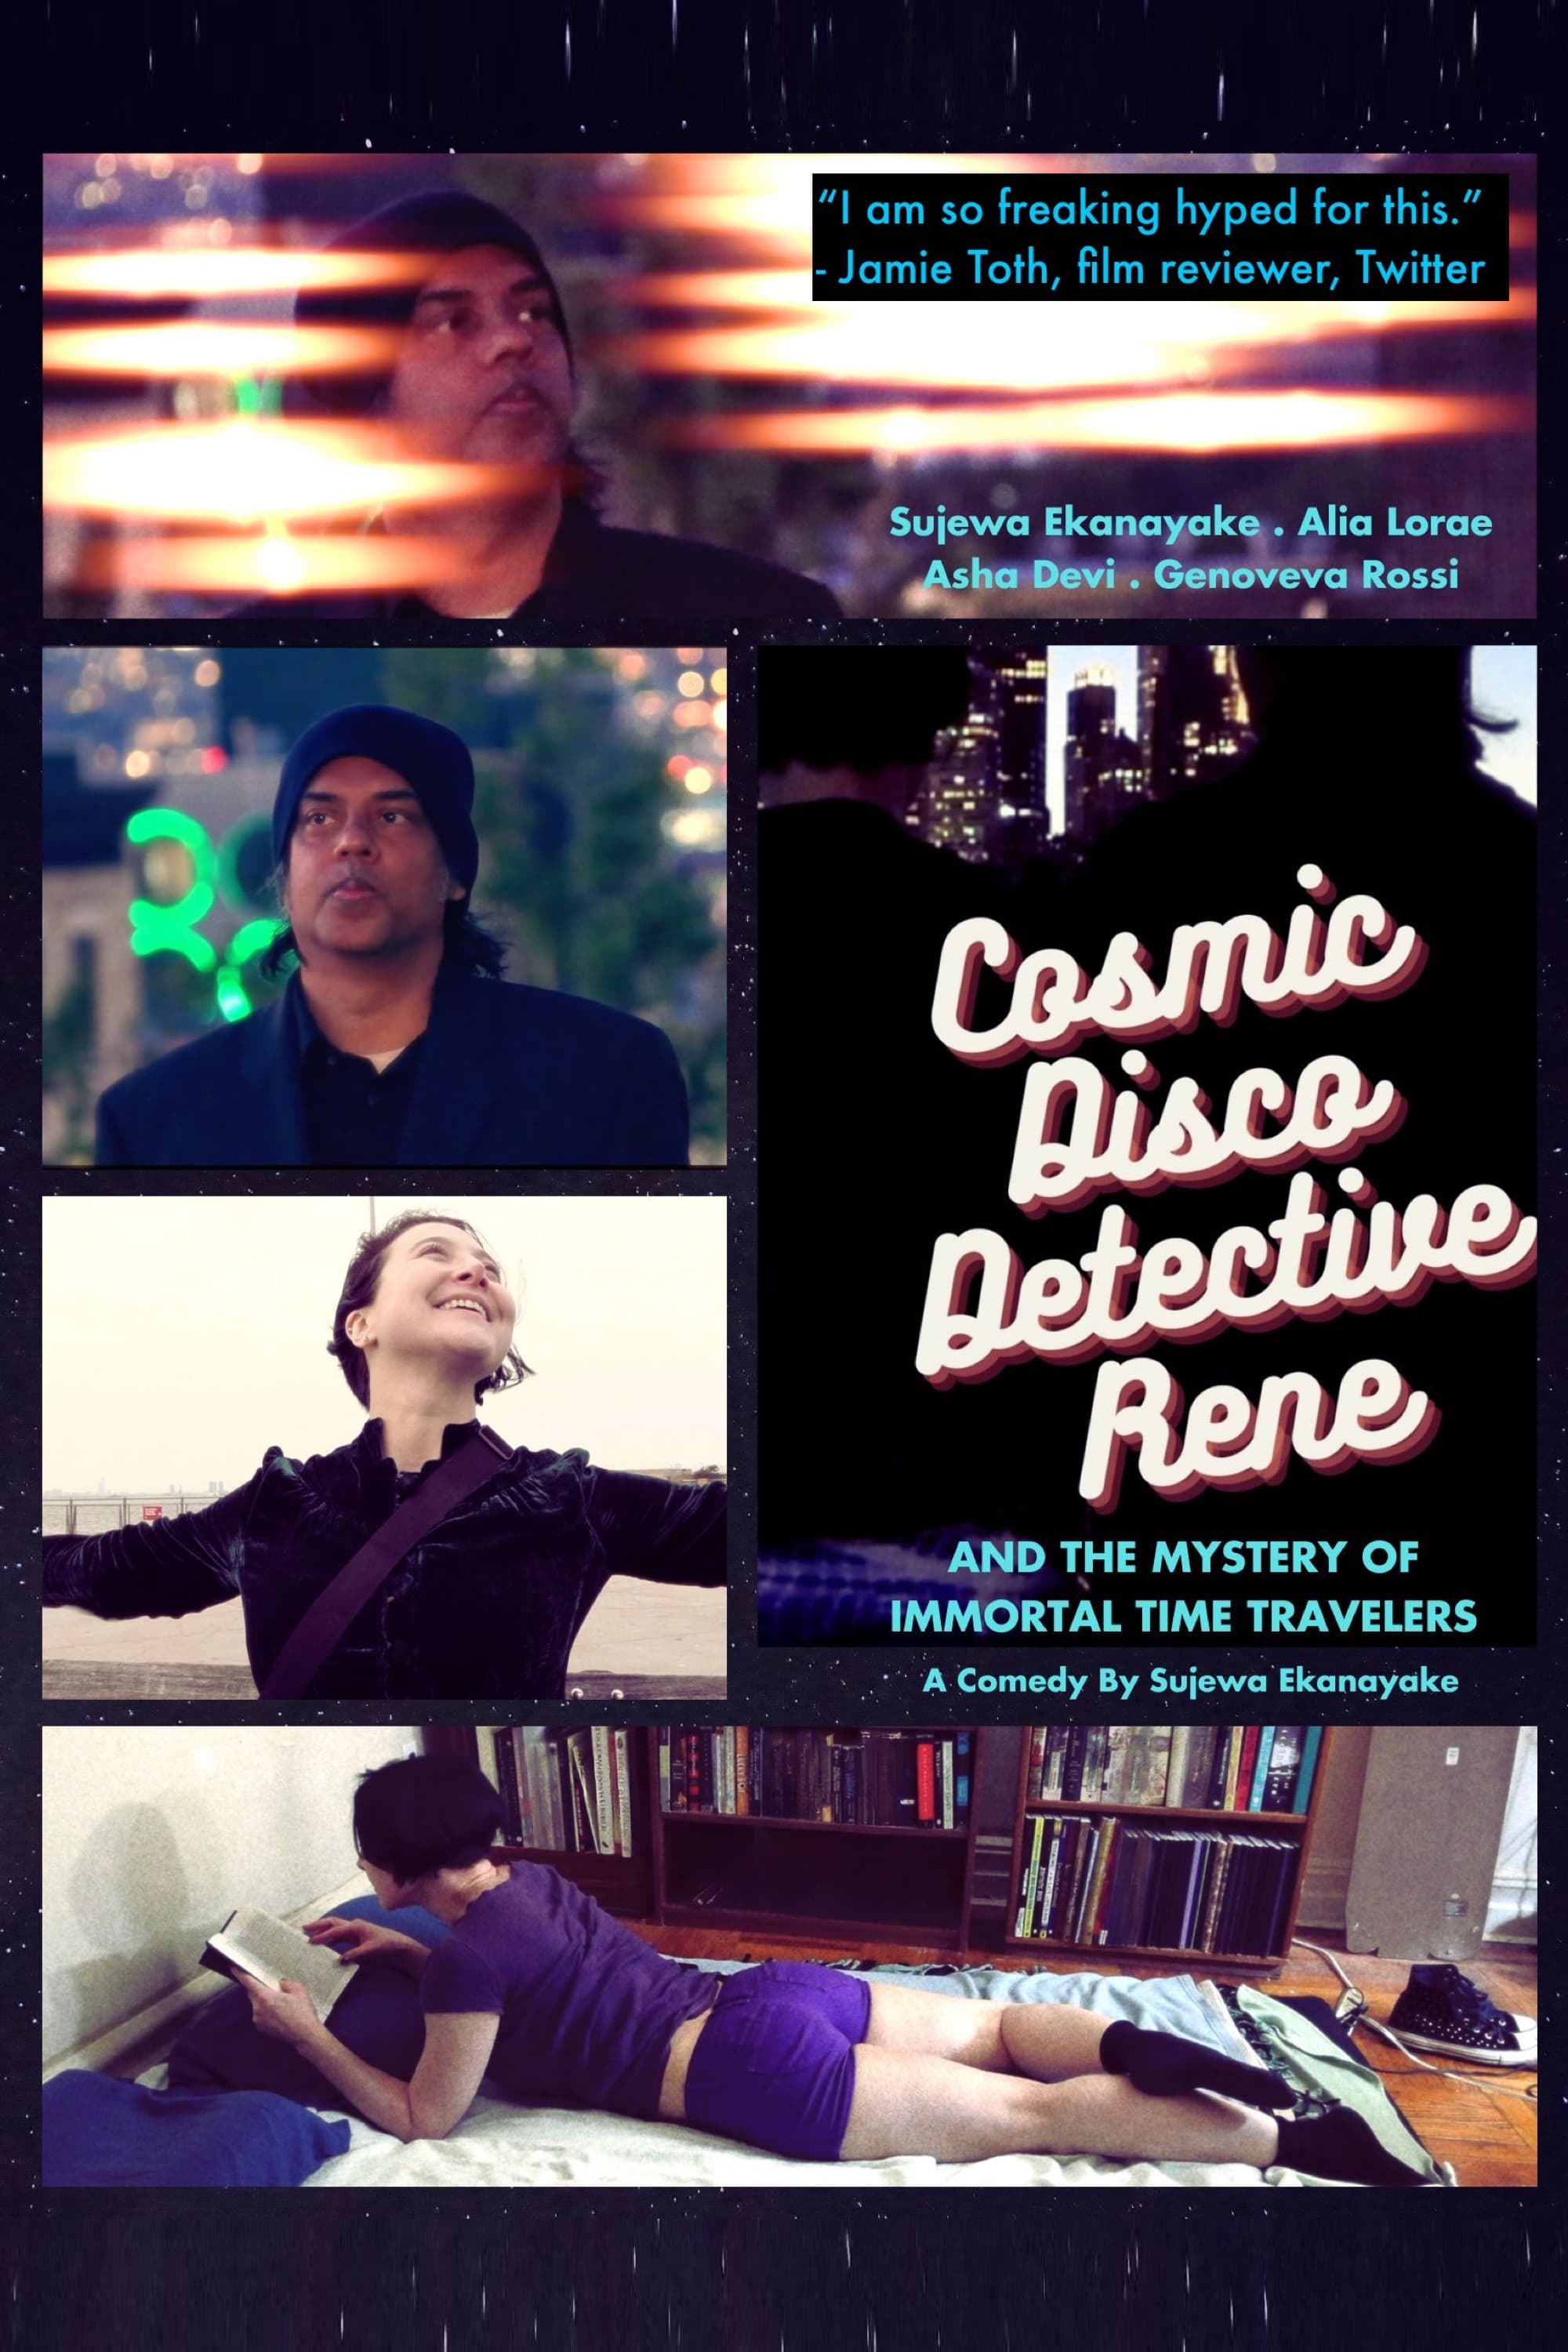 Cosmic Disco Detective Rene and the Mystery of Immortal Time Travelers